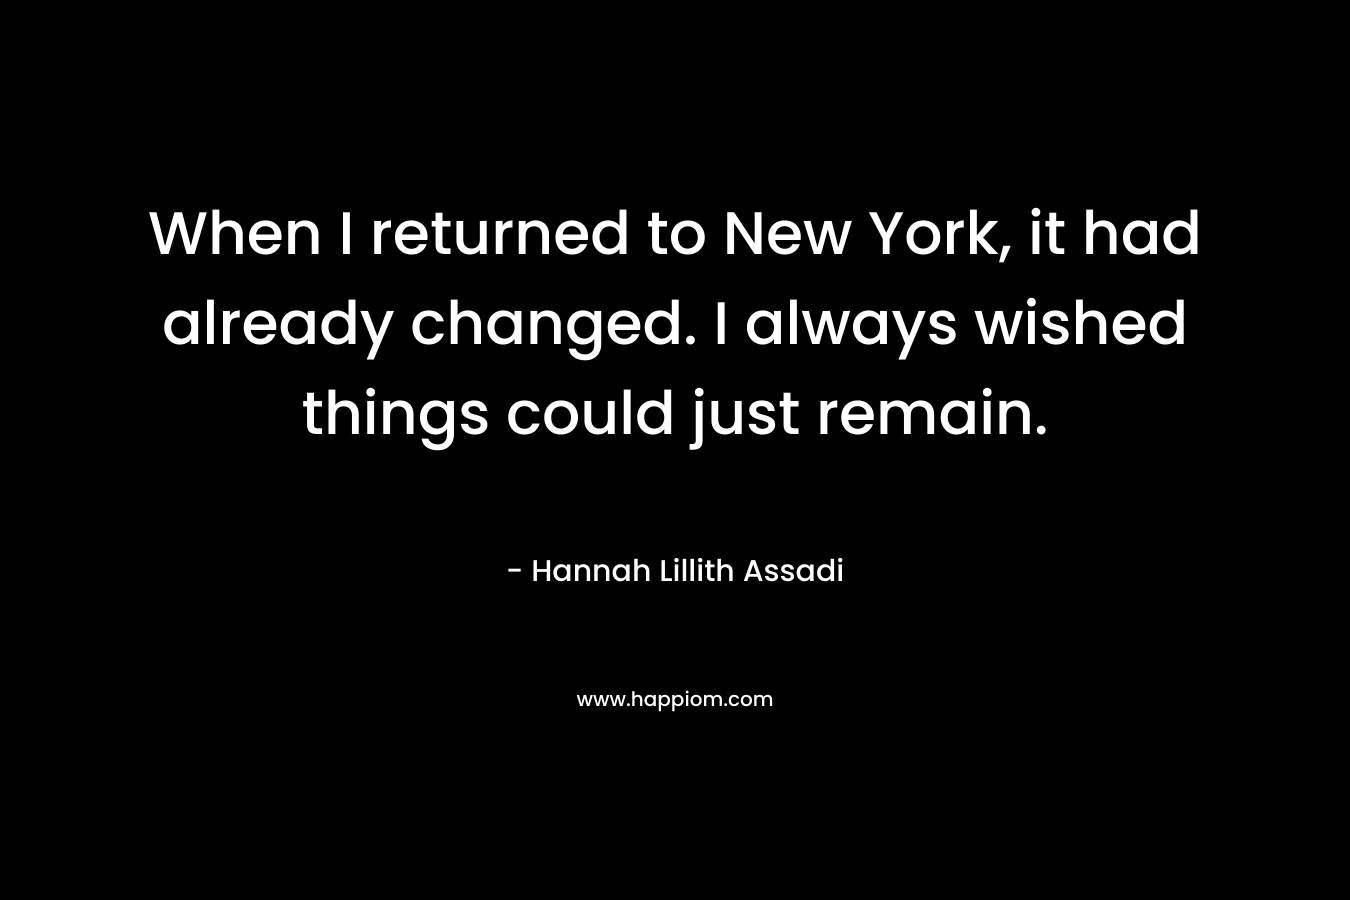 When I returned to New York, it had already changed. I always wished things could just remain.